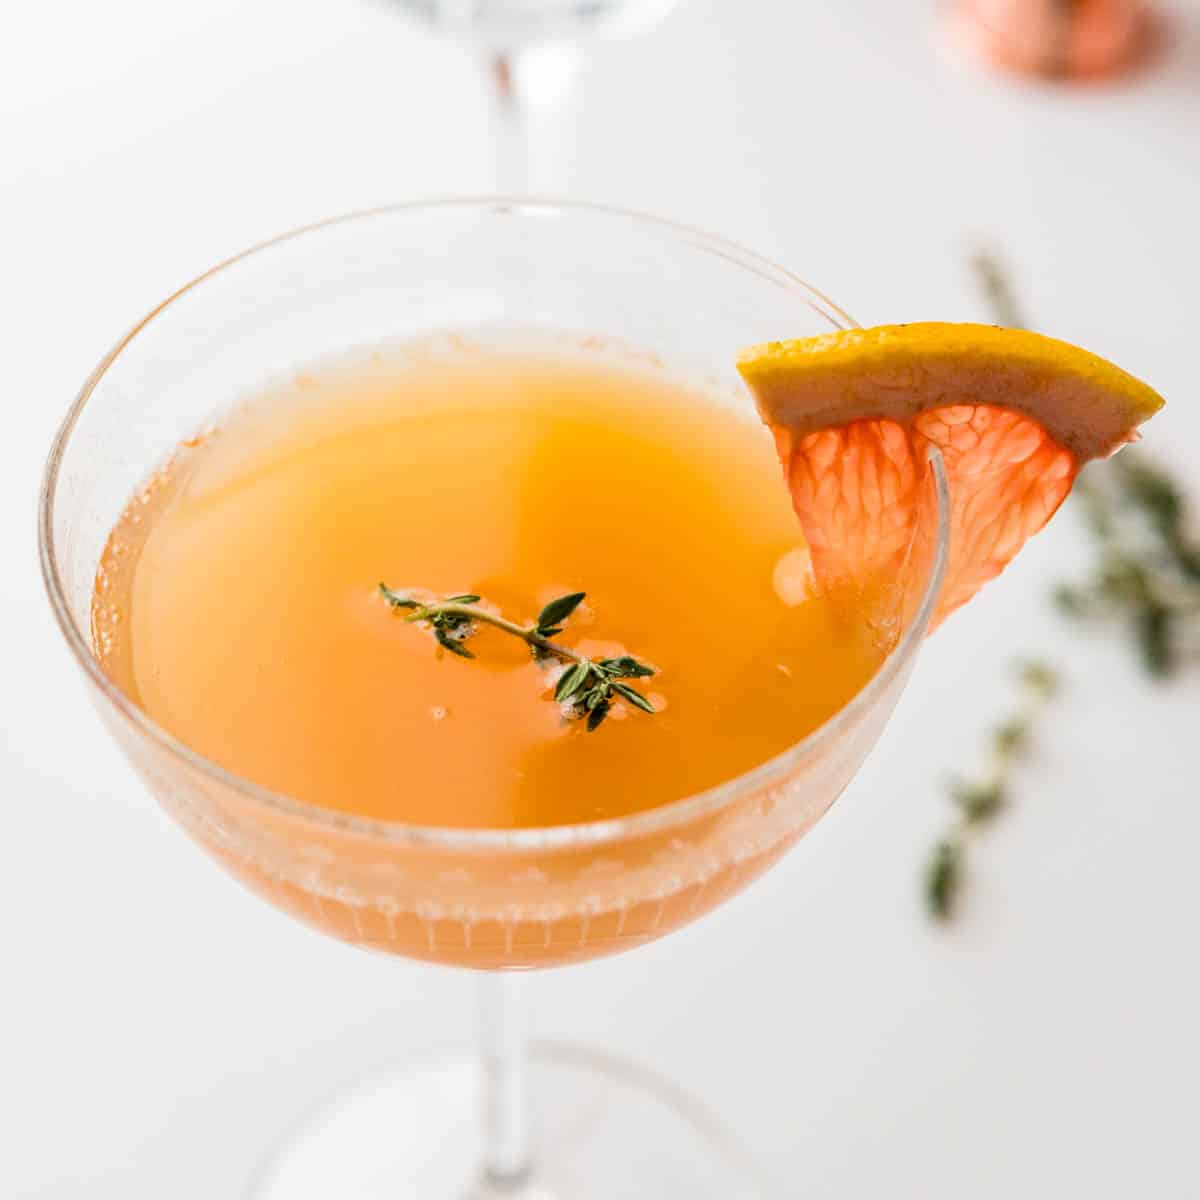 grapefruit juice cocktails in a coupe glass with a wedge of fruit for garnish.